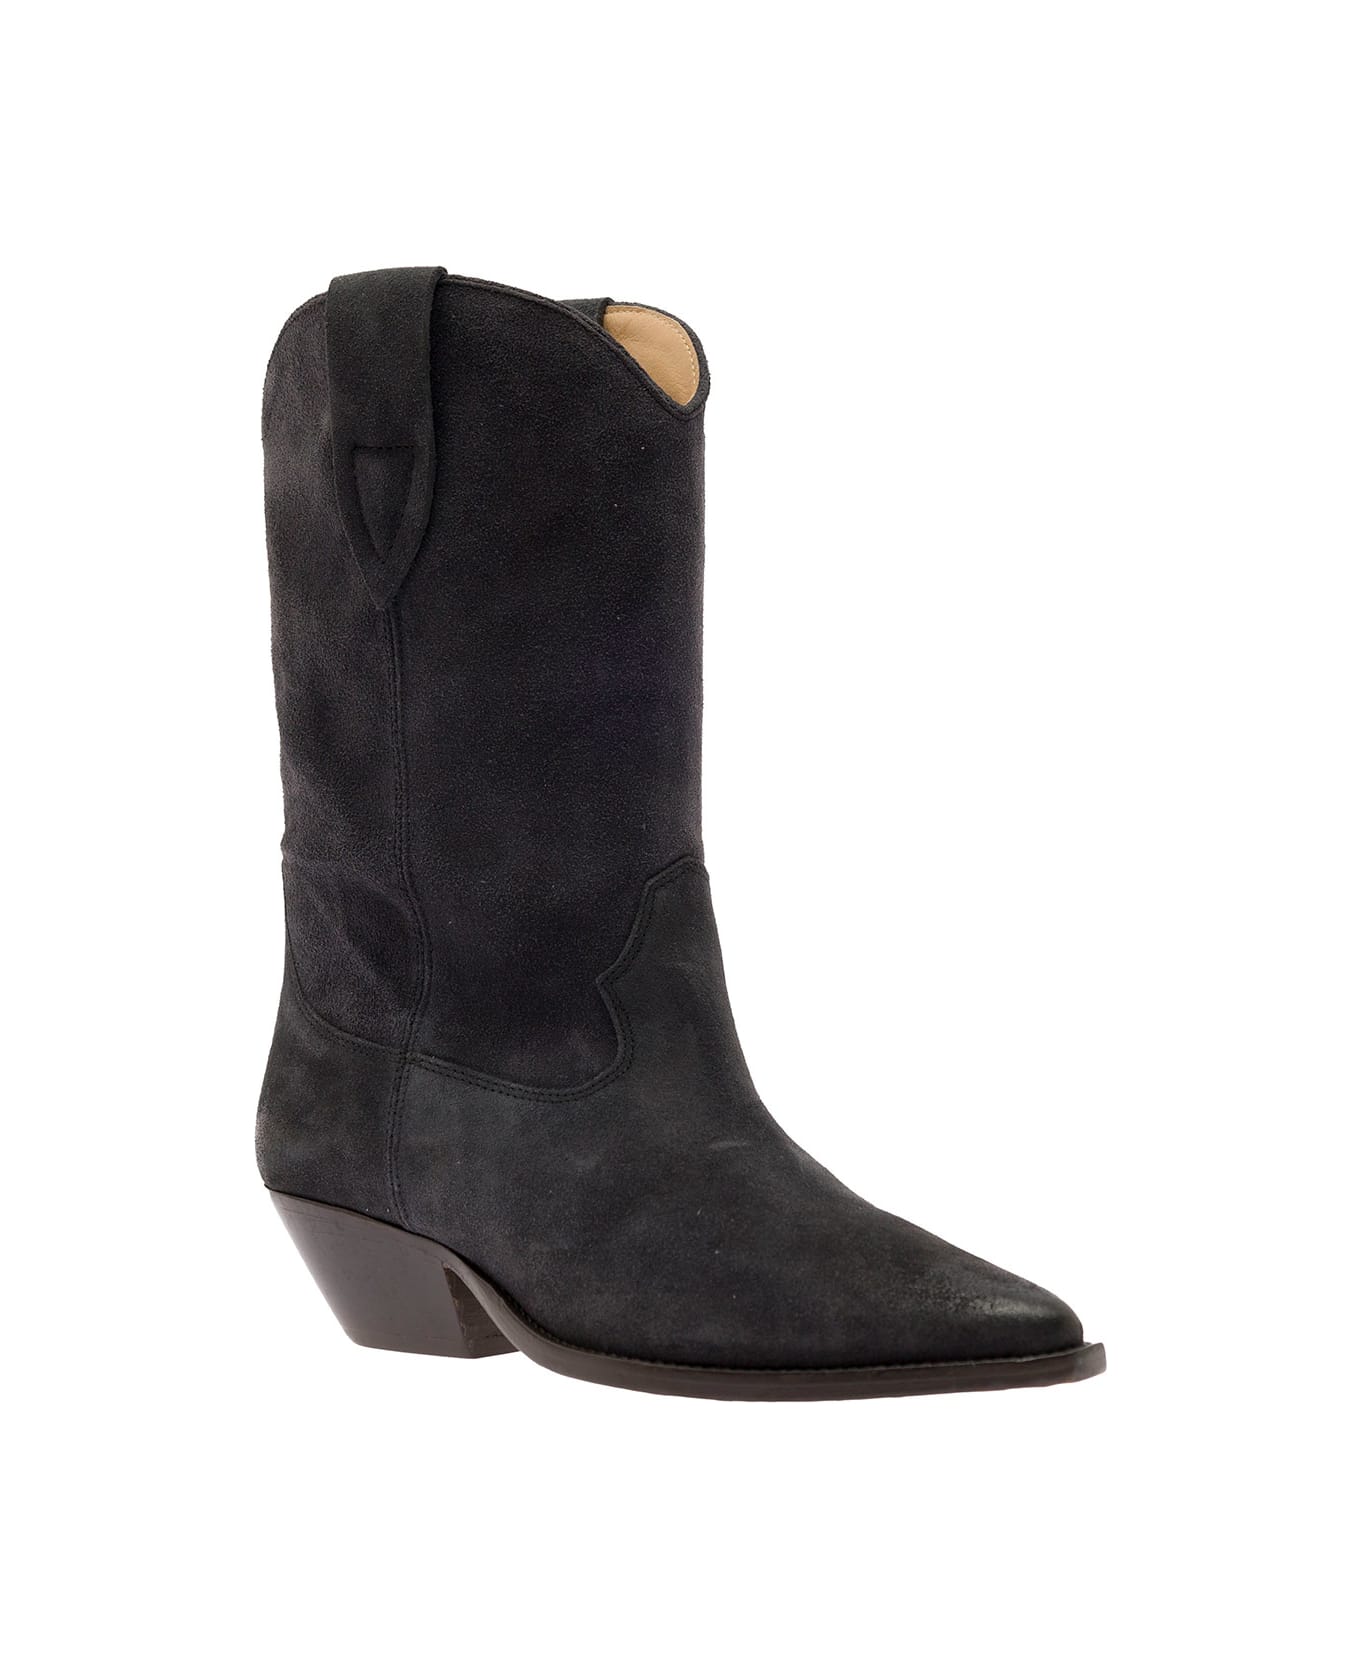 Isabel Marant 'duerto' Beige Western Style Boots In Suede Woman - Black